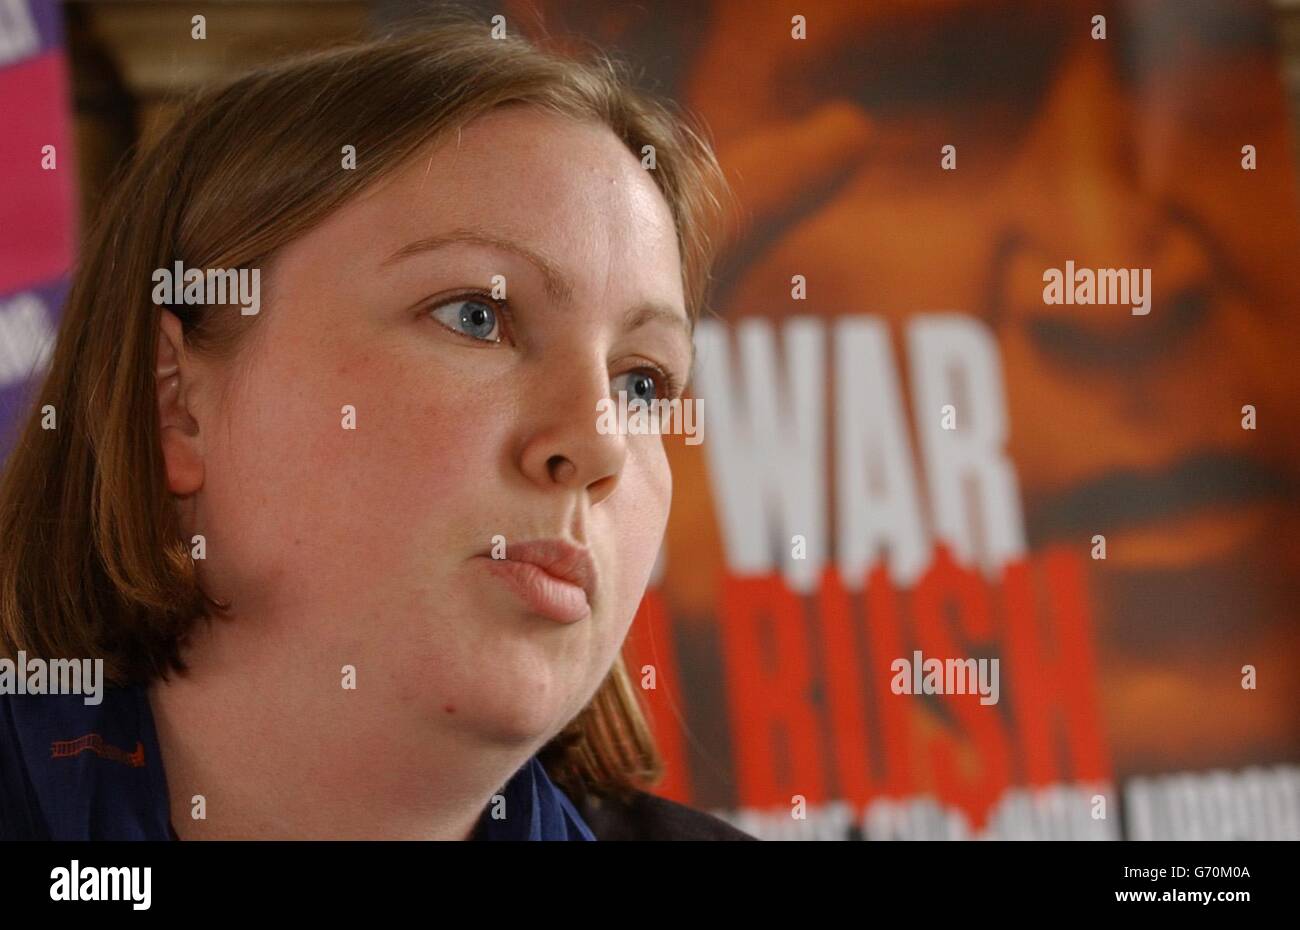 Clare Lee of the Dublin Grassroots Network who discussed with peace groups, during a press conference in Dublin, plans for demonstrating against President Bush visit to Irelend for next month's EU - U.S. summit. Stock Photo